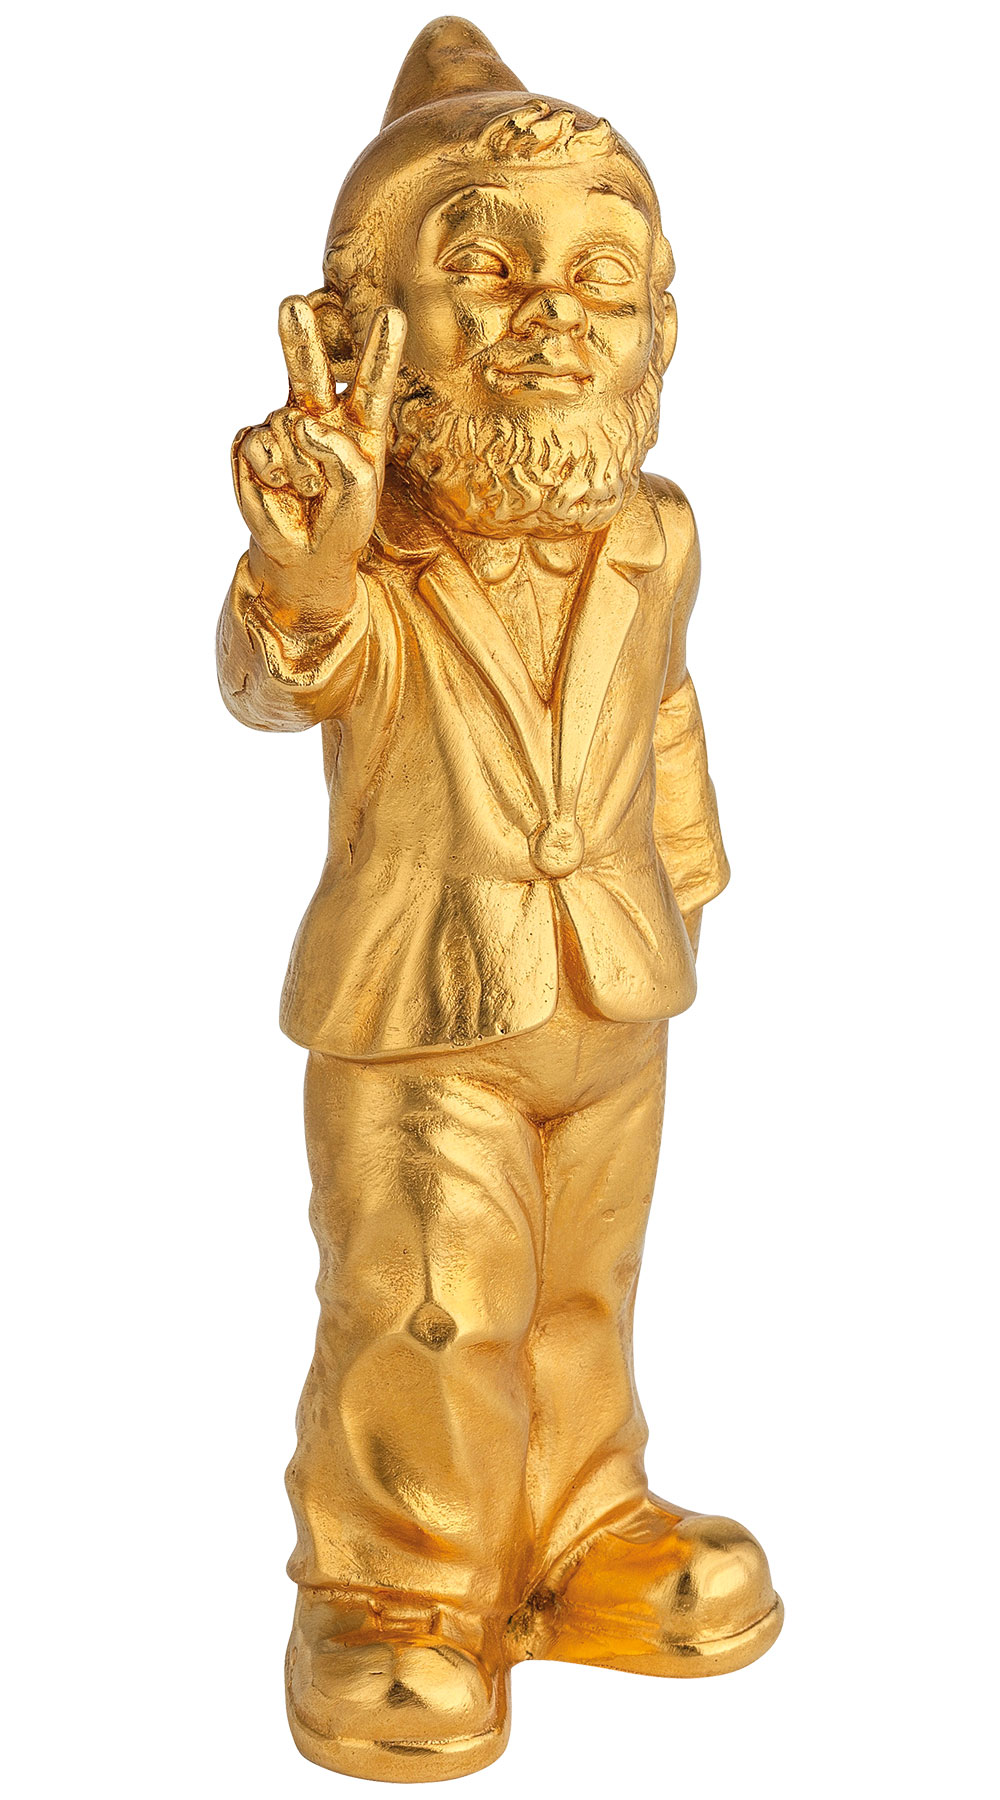 Sculpture "Victory", gold-plated version by Ottmar Hörl